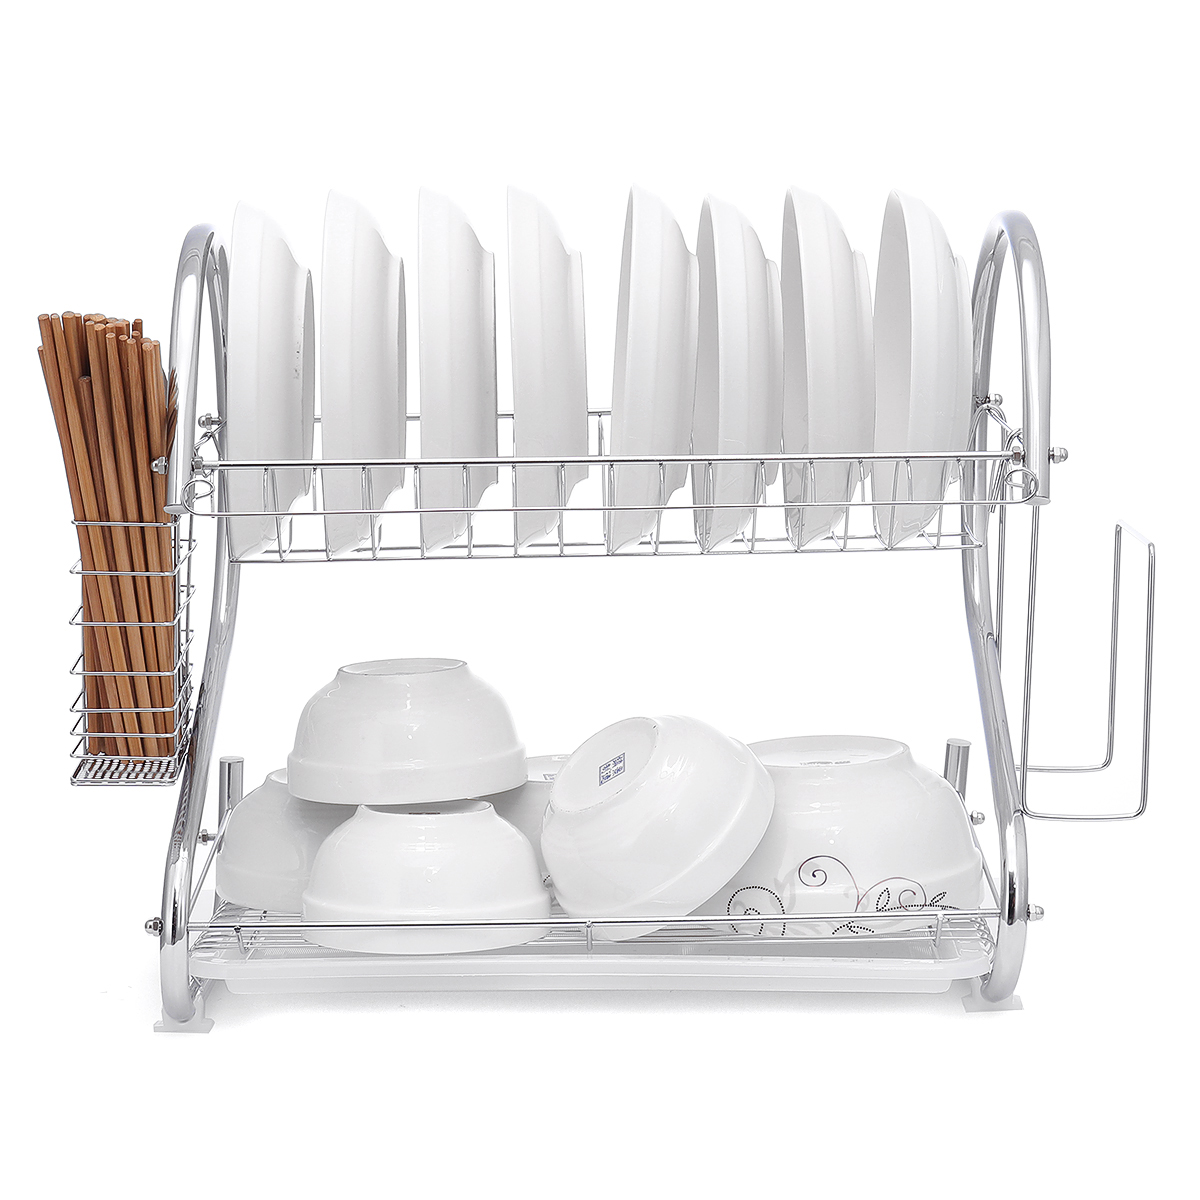 Dish-Drying-Rack-2-Tier-Dish-Rack-with-Utensil-Holder-Cup-Holder-and-Dish-Drainer-for-Kitchen-Counte-1665917-7